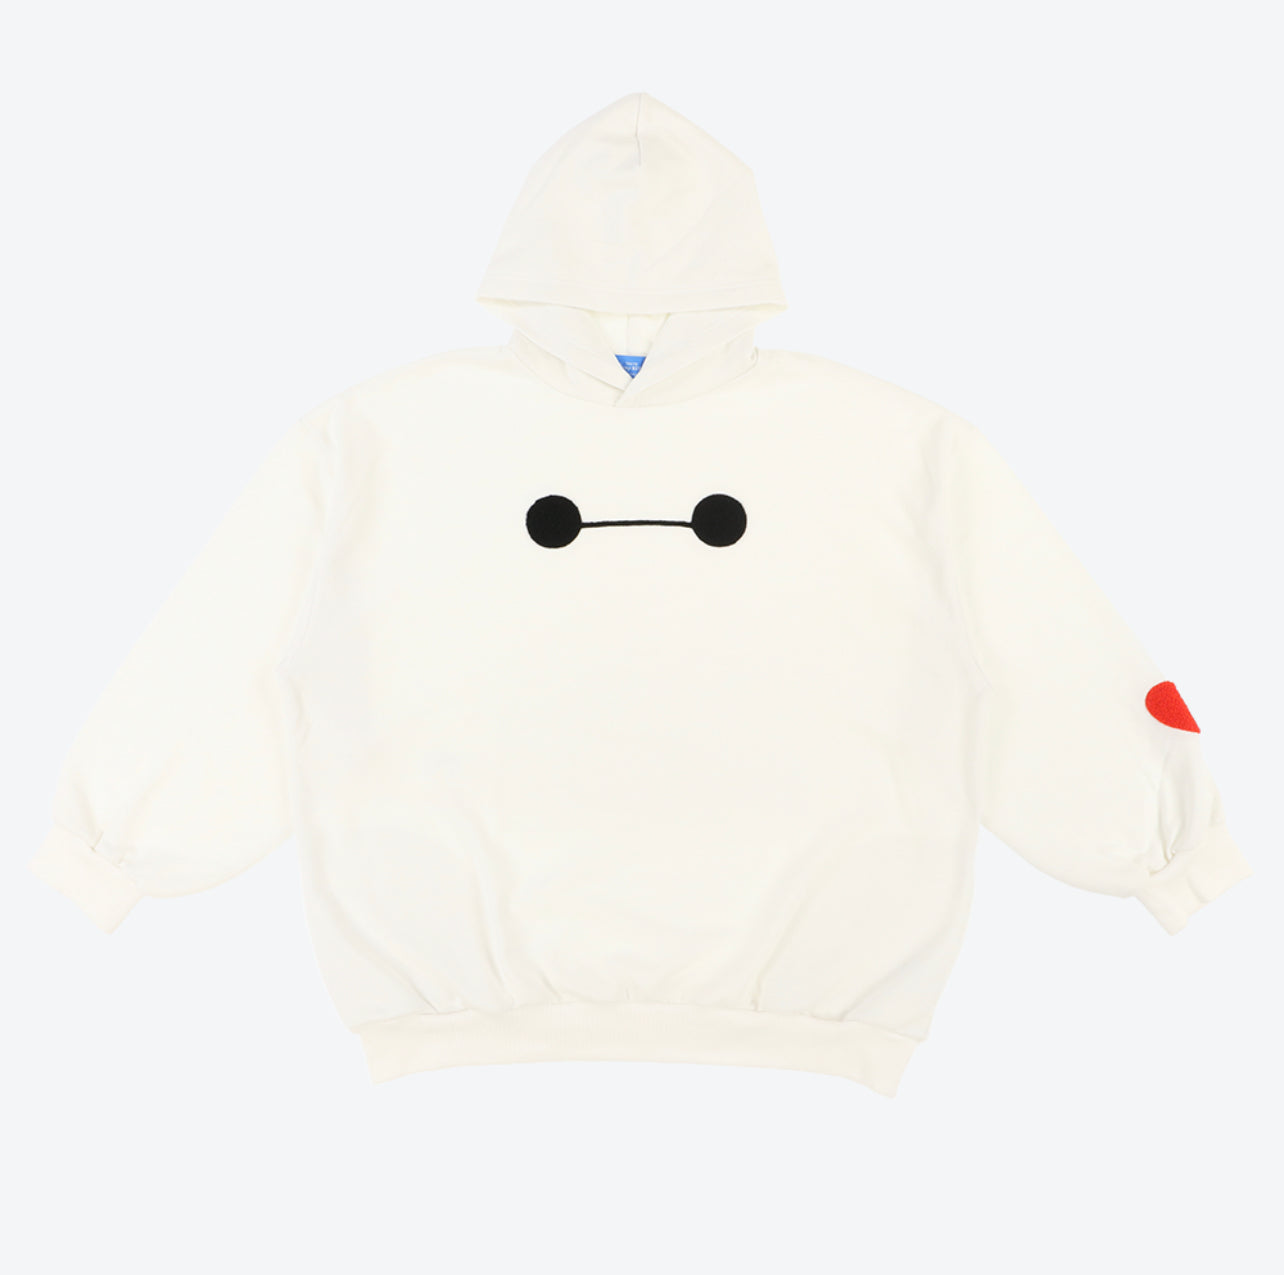 TDR - Baymax with Cute Heart Oversized Hoodies for Adults (Release Date: Oct 12)